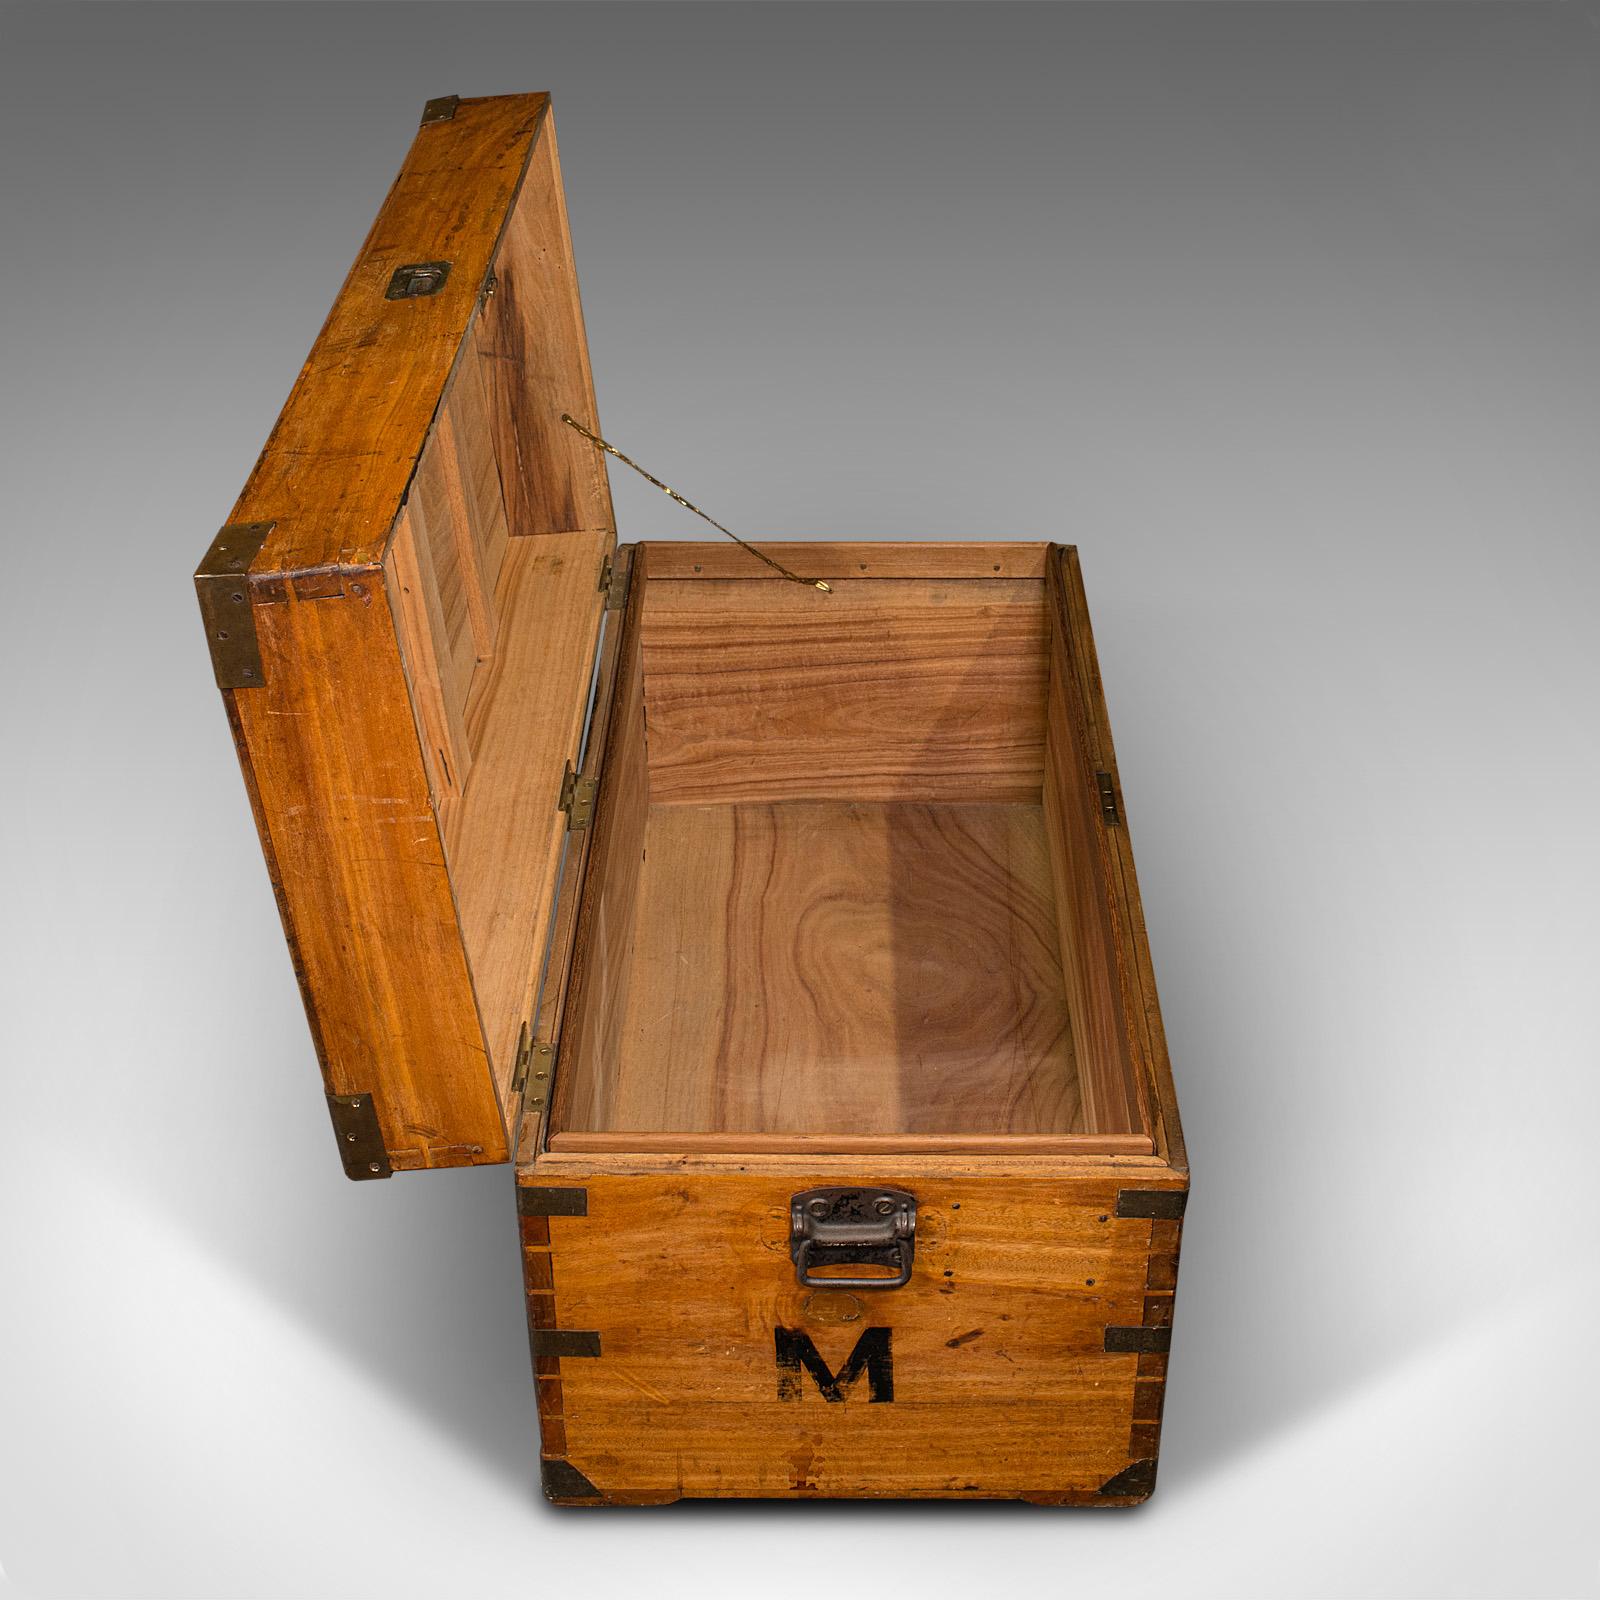 Vintage Campaign Chest, English, Camphorwood, Military Travel Trunk, Circa 1930 For Sale 1